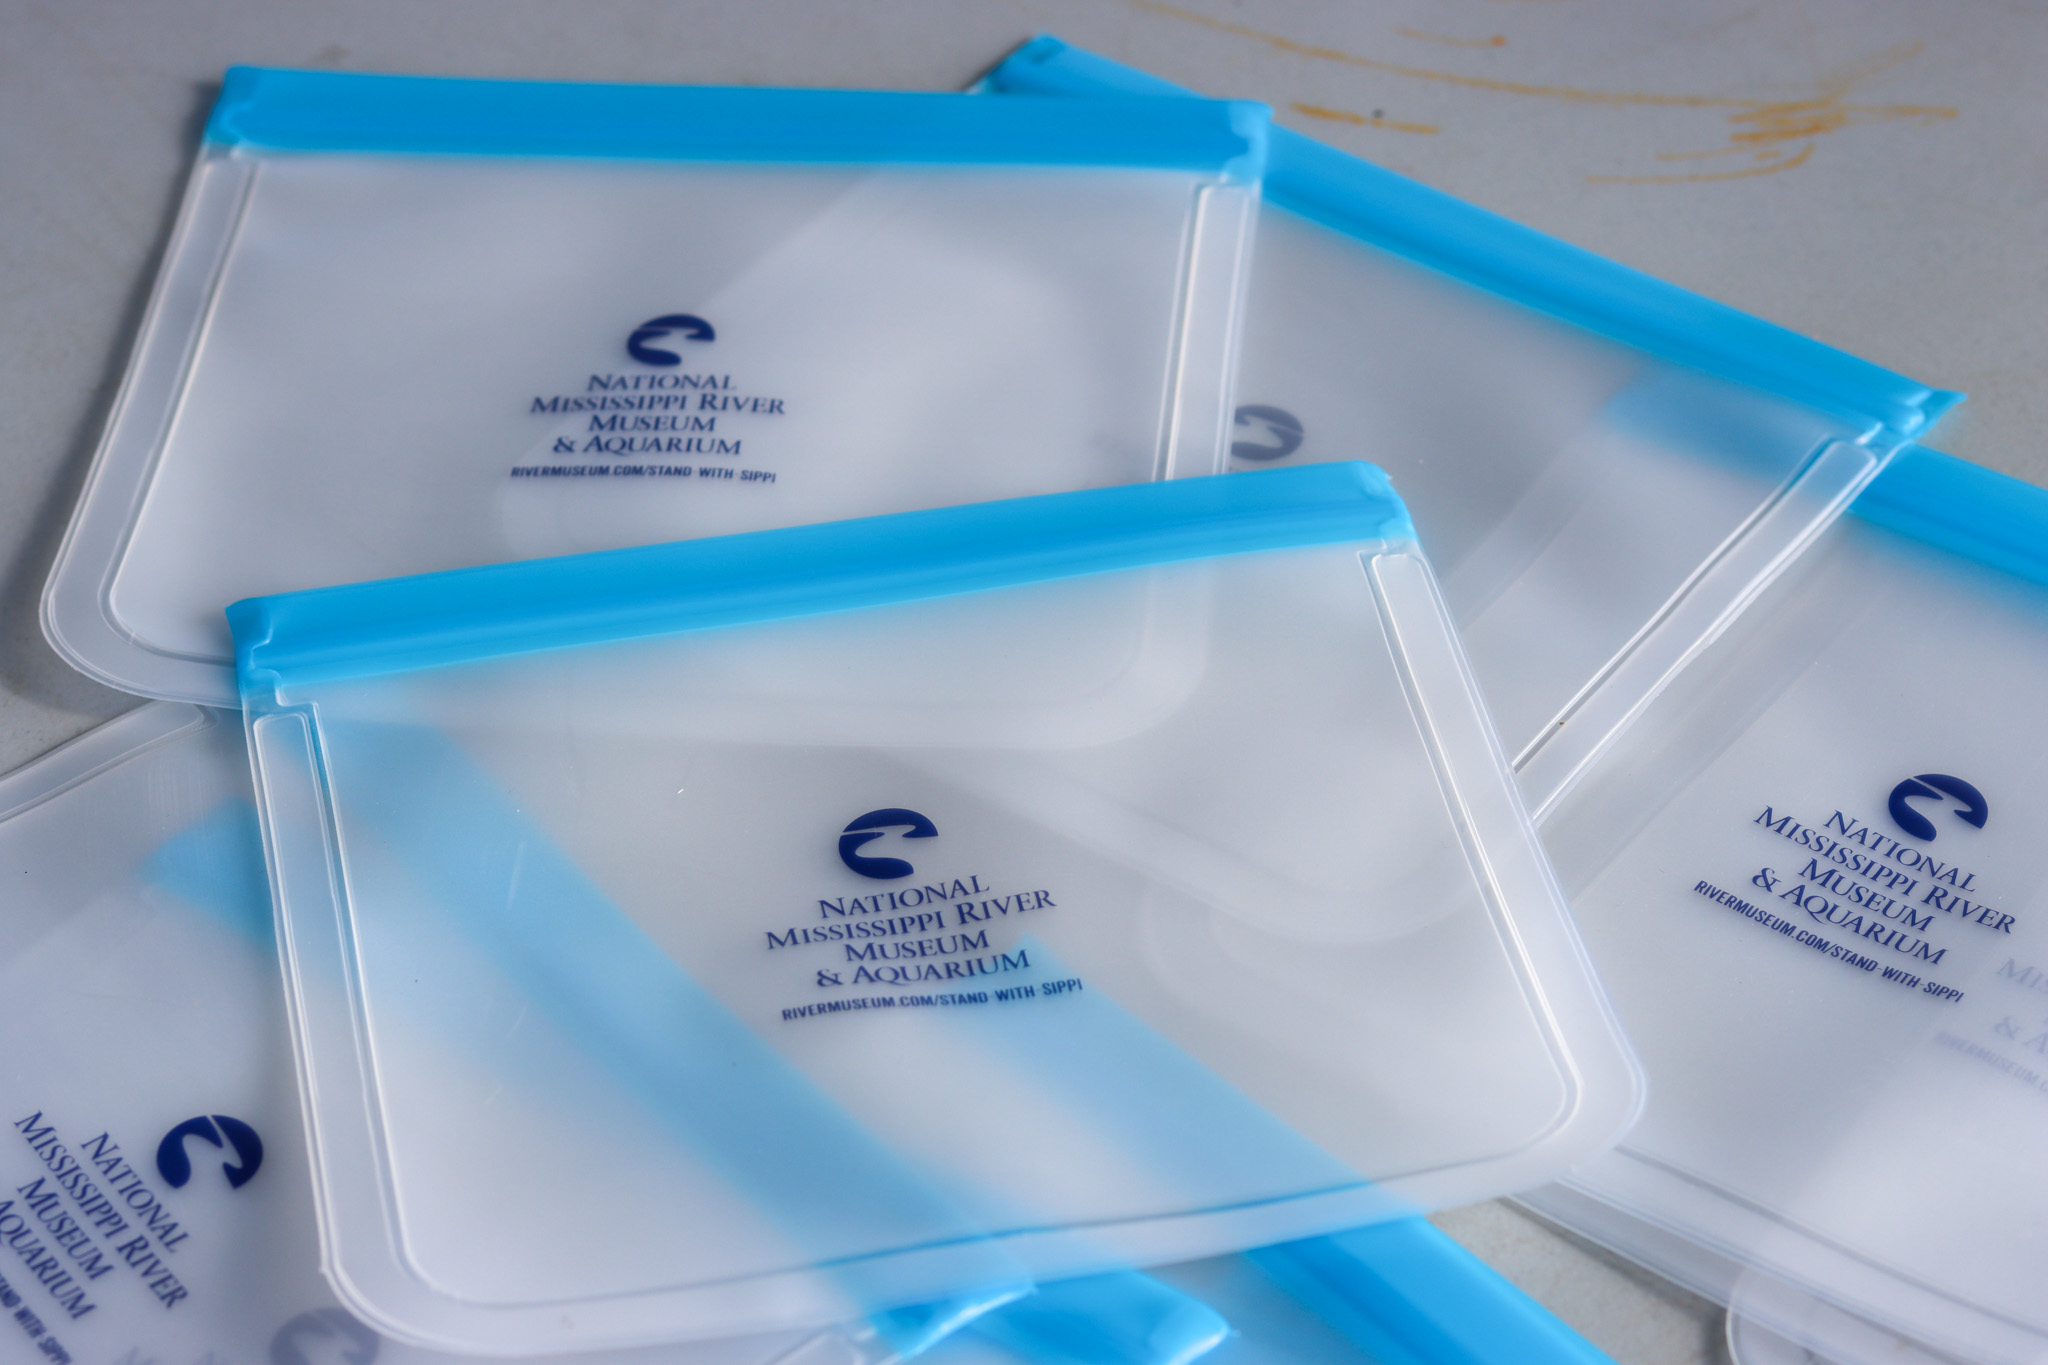 reusable and resealable bags with River Museum logo